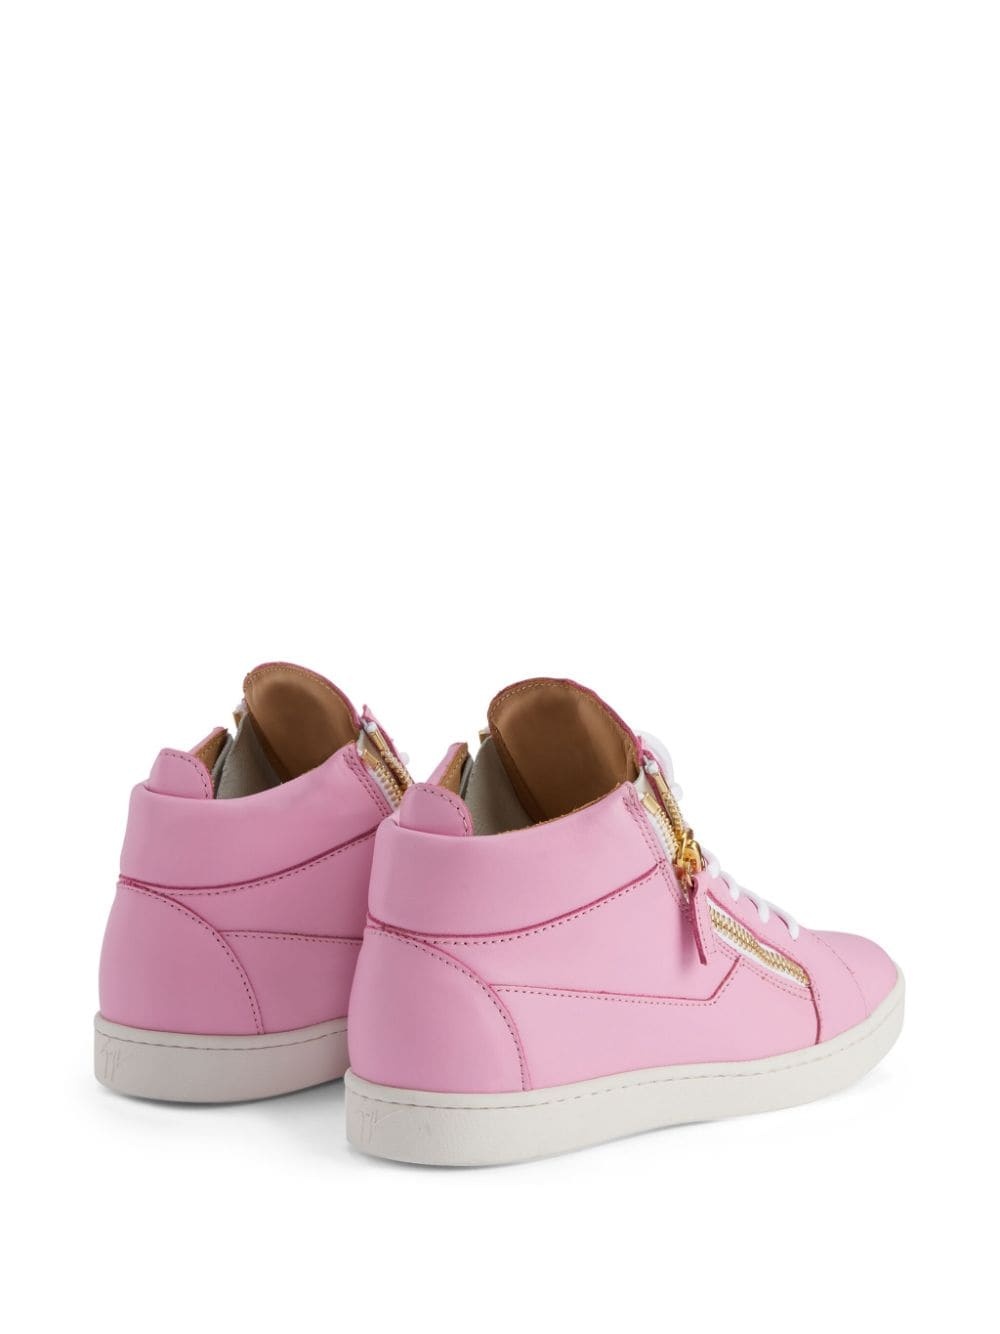 Kriss leather sneakers - 3